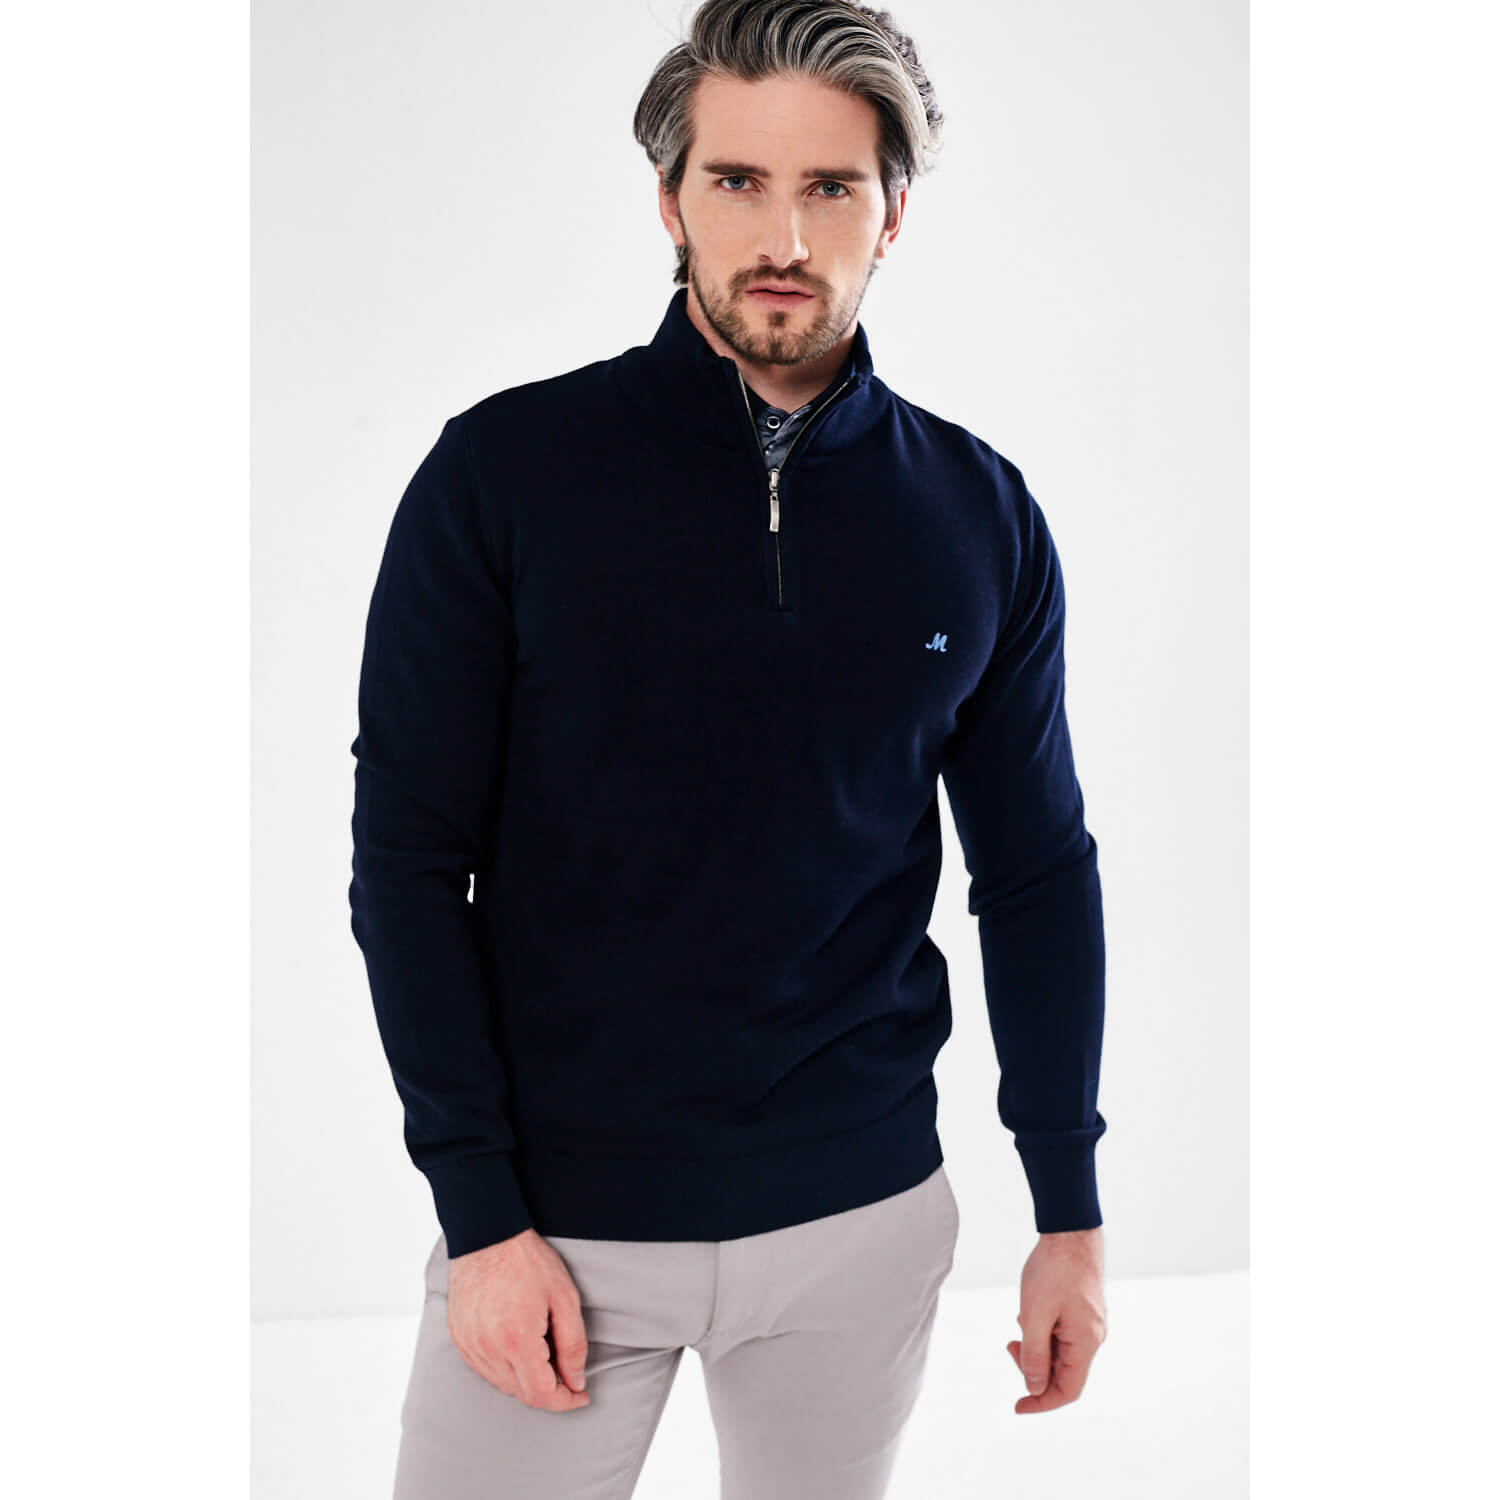 Mineral Altis 1/4 Zip Knit - Navy 1 Shaws Department Stores